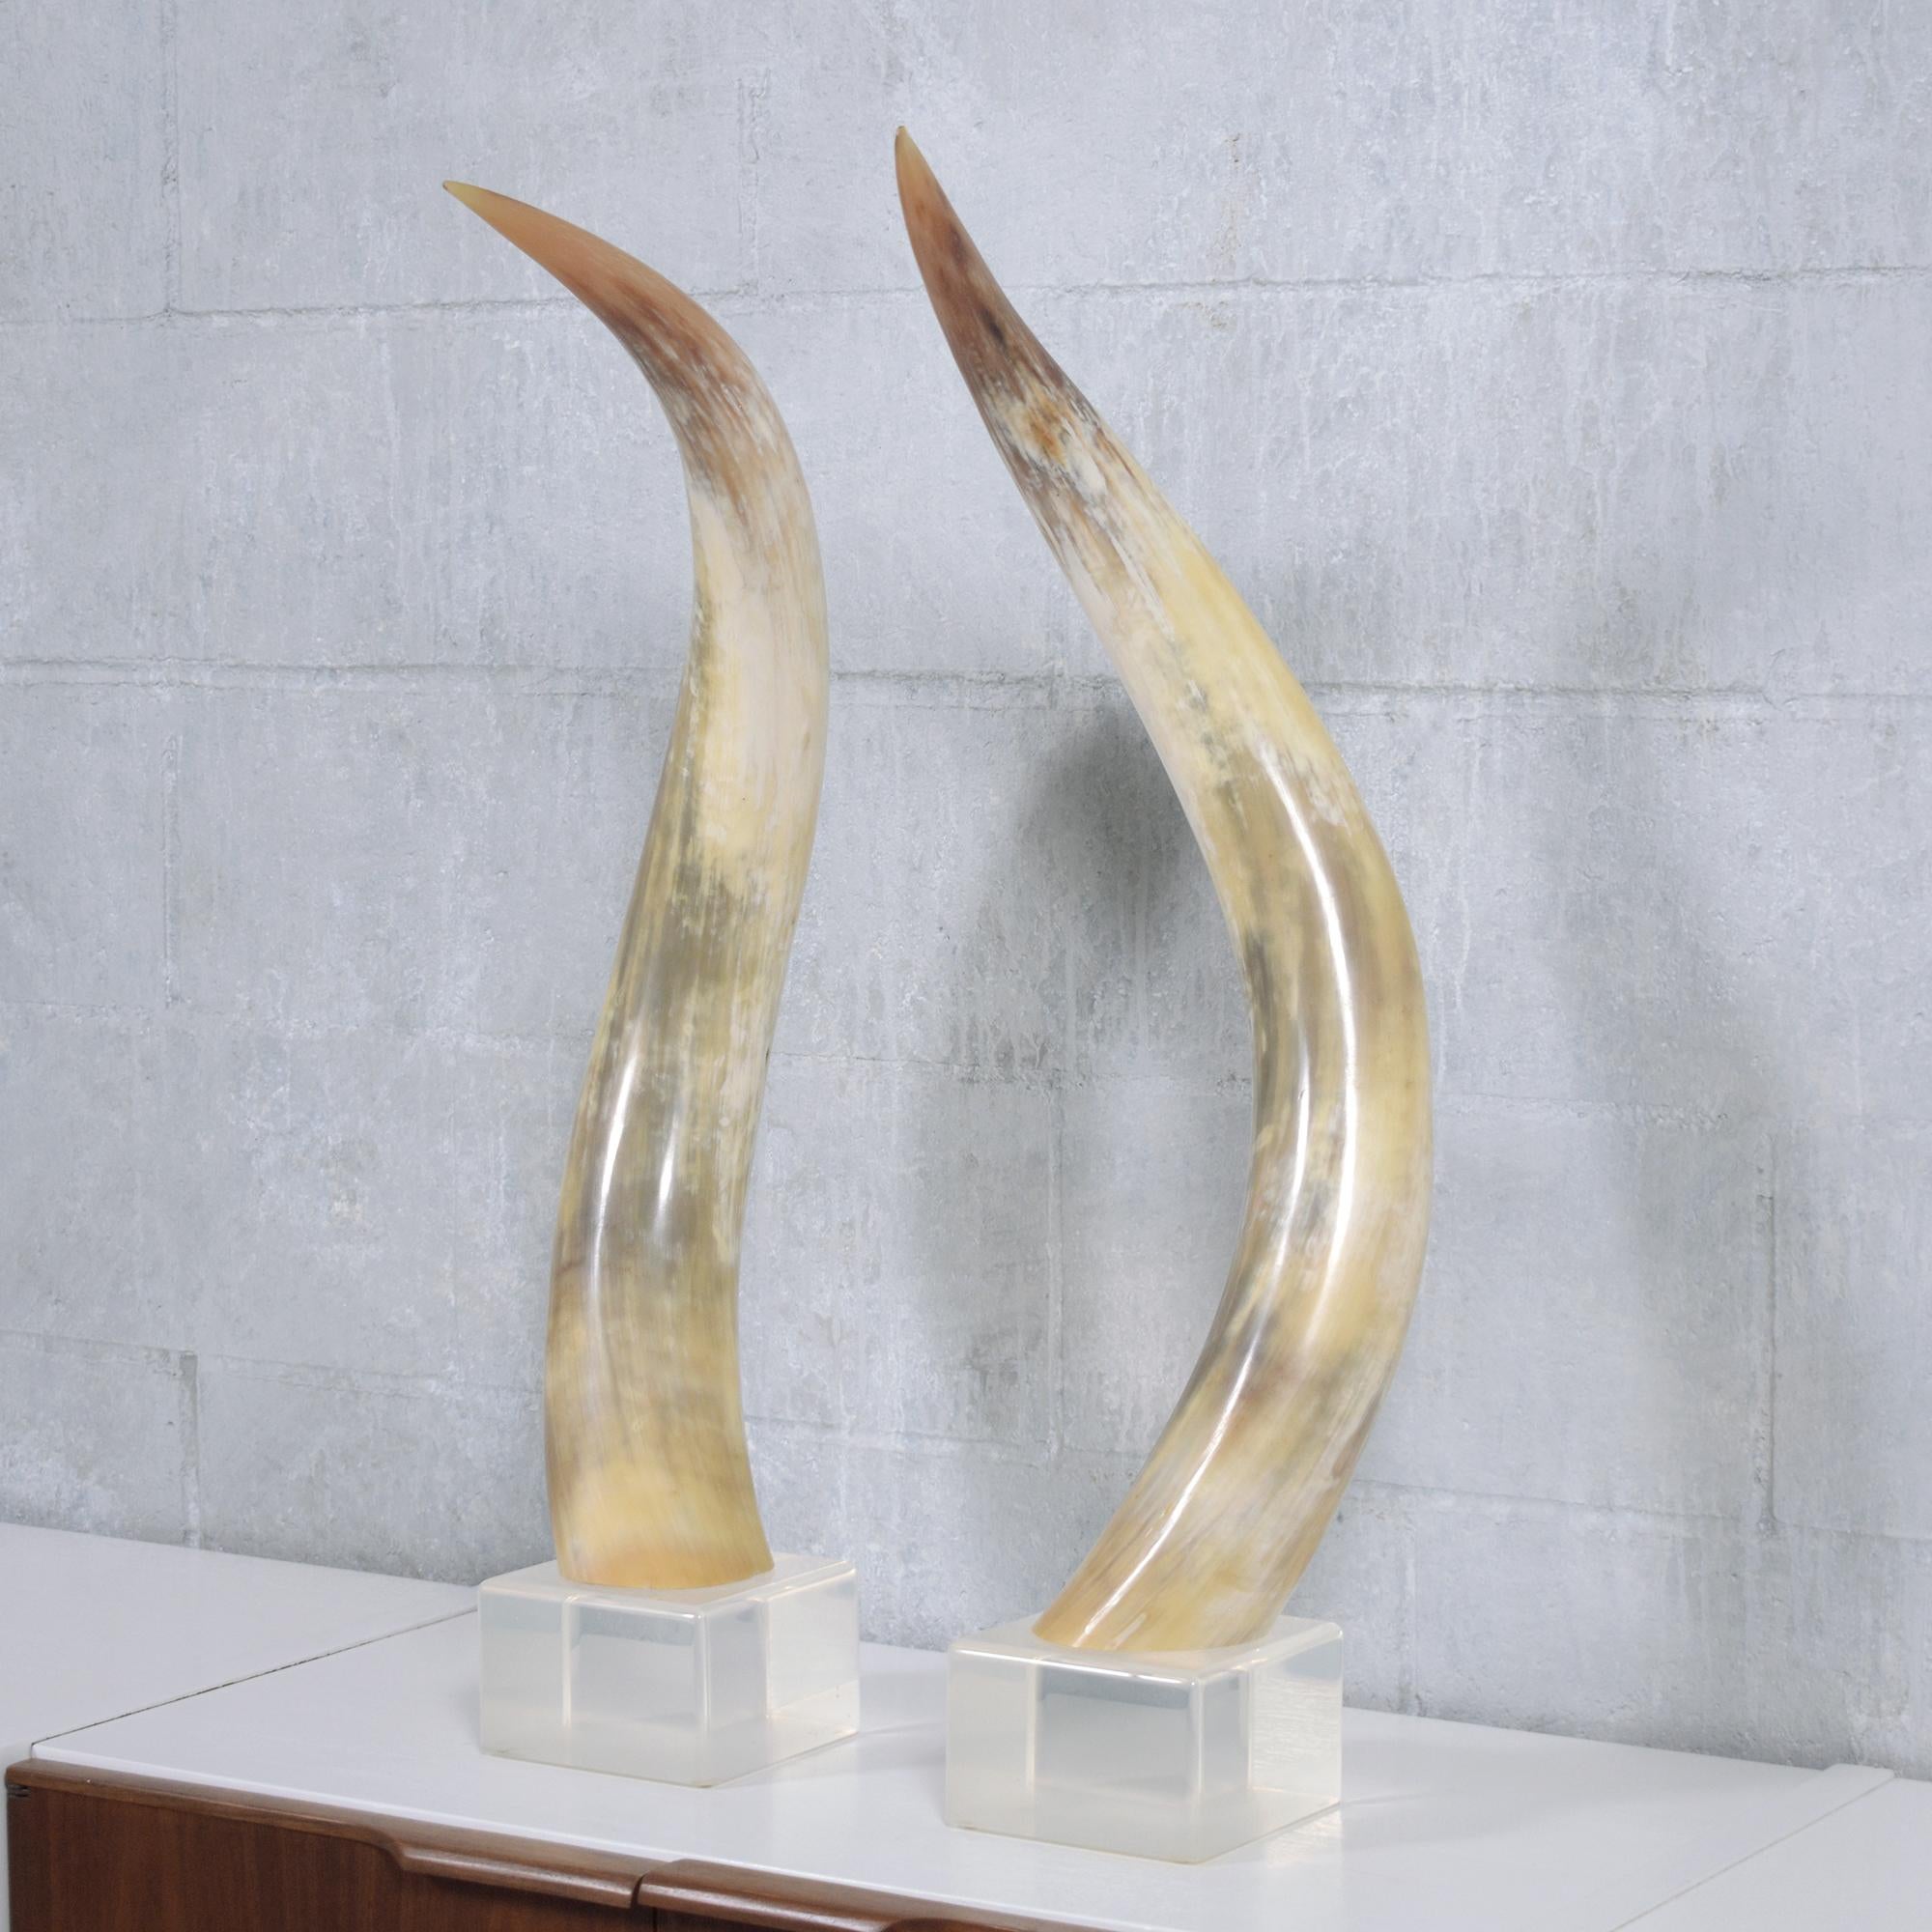 Elevate your decor with this chic pair of mounted steer horn sculptures, each gracefully displayed on a round wood plinth base. These exquisite bases are hand-painted in a sophisticated faux tortoise shell pattern, accented with tasteful gilt